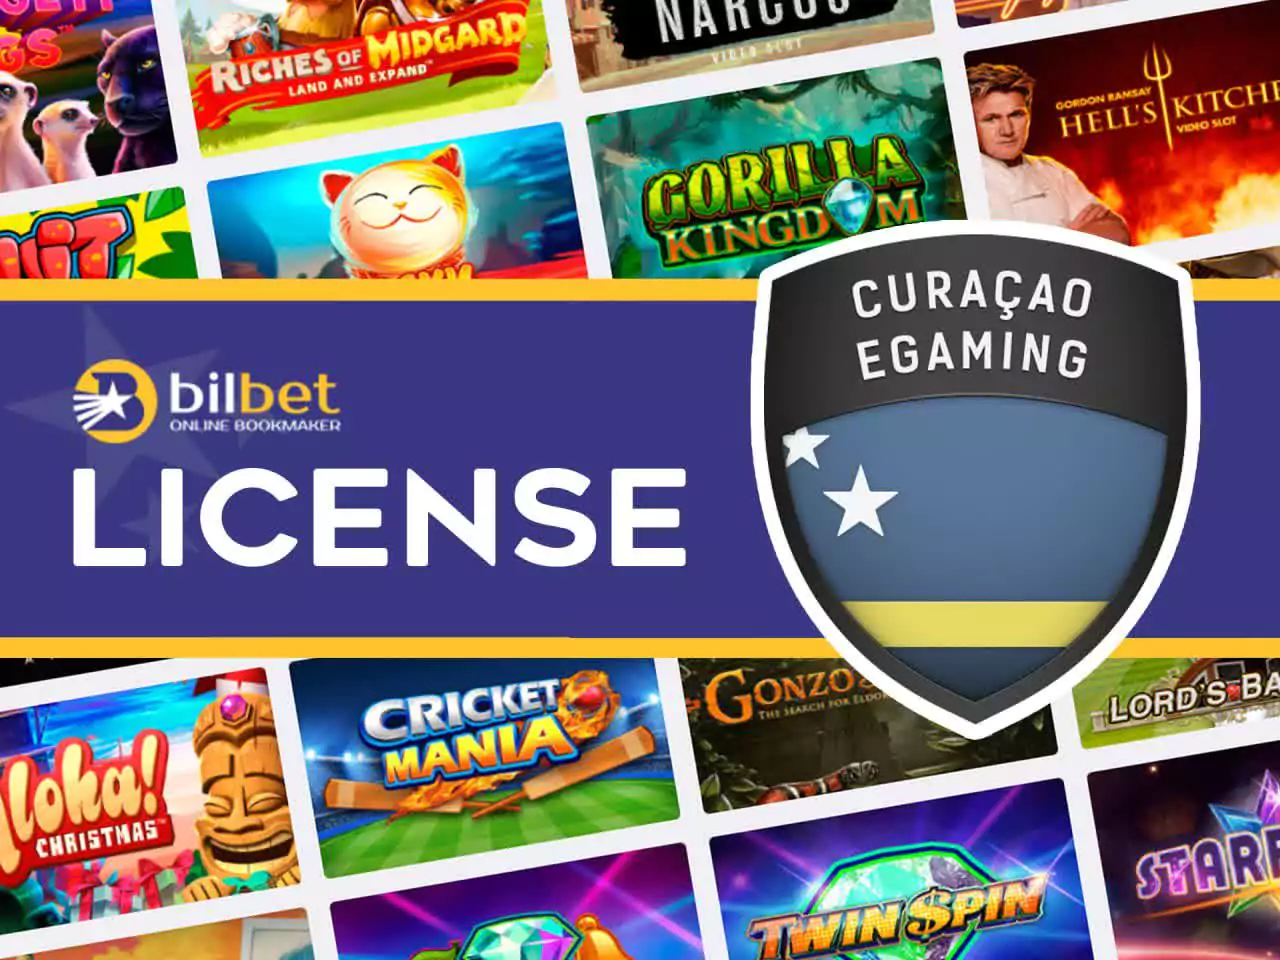 Bilber is licensed by the Curcao eGaming Commission.